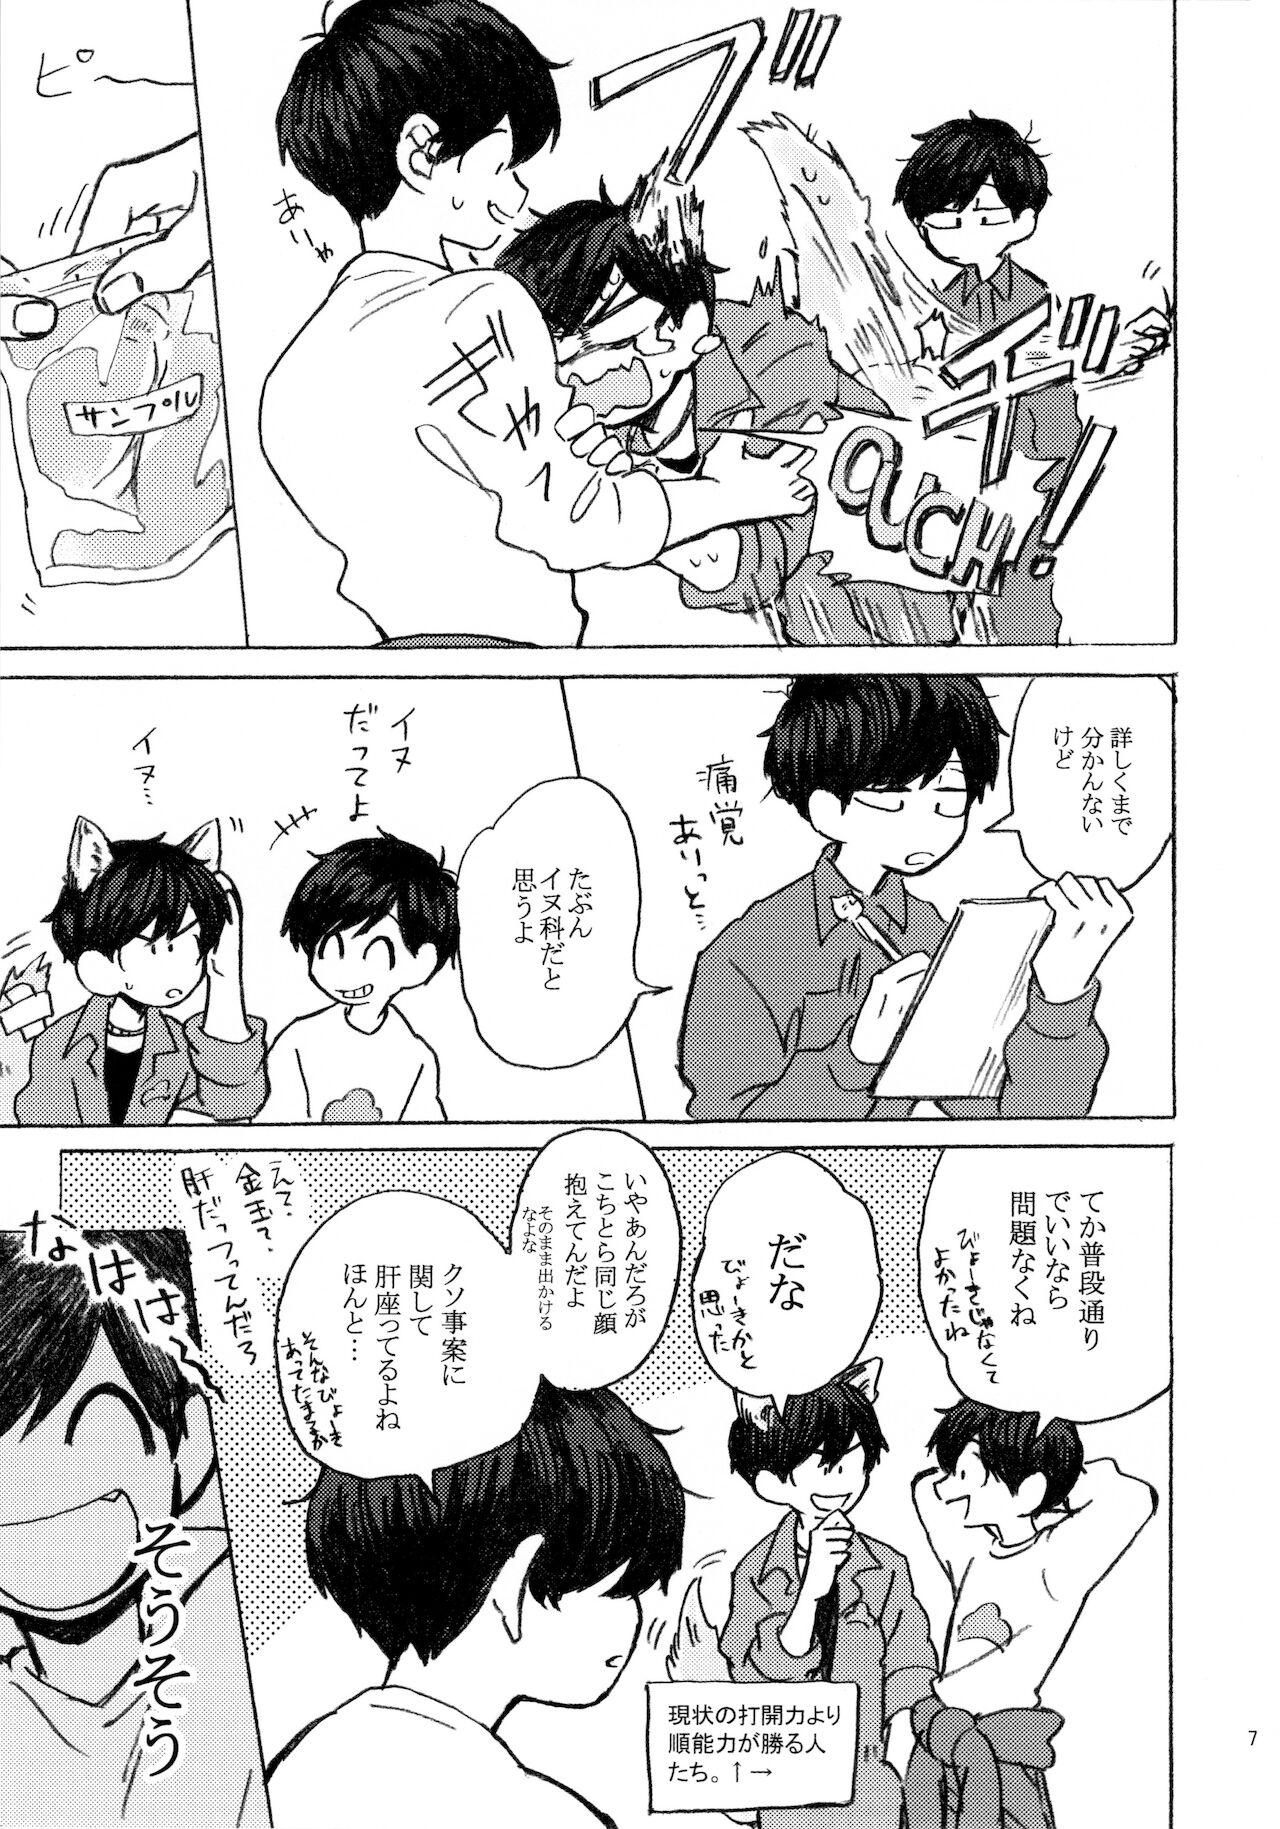 Friend PLEASE WAG YOUR TAIL ONLY TO ME. - Osomatsu-san Scene - Page 8